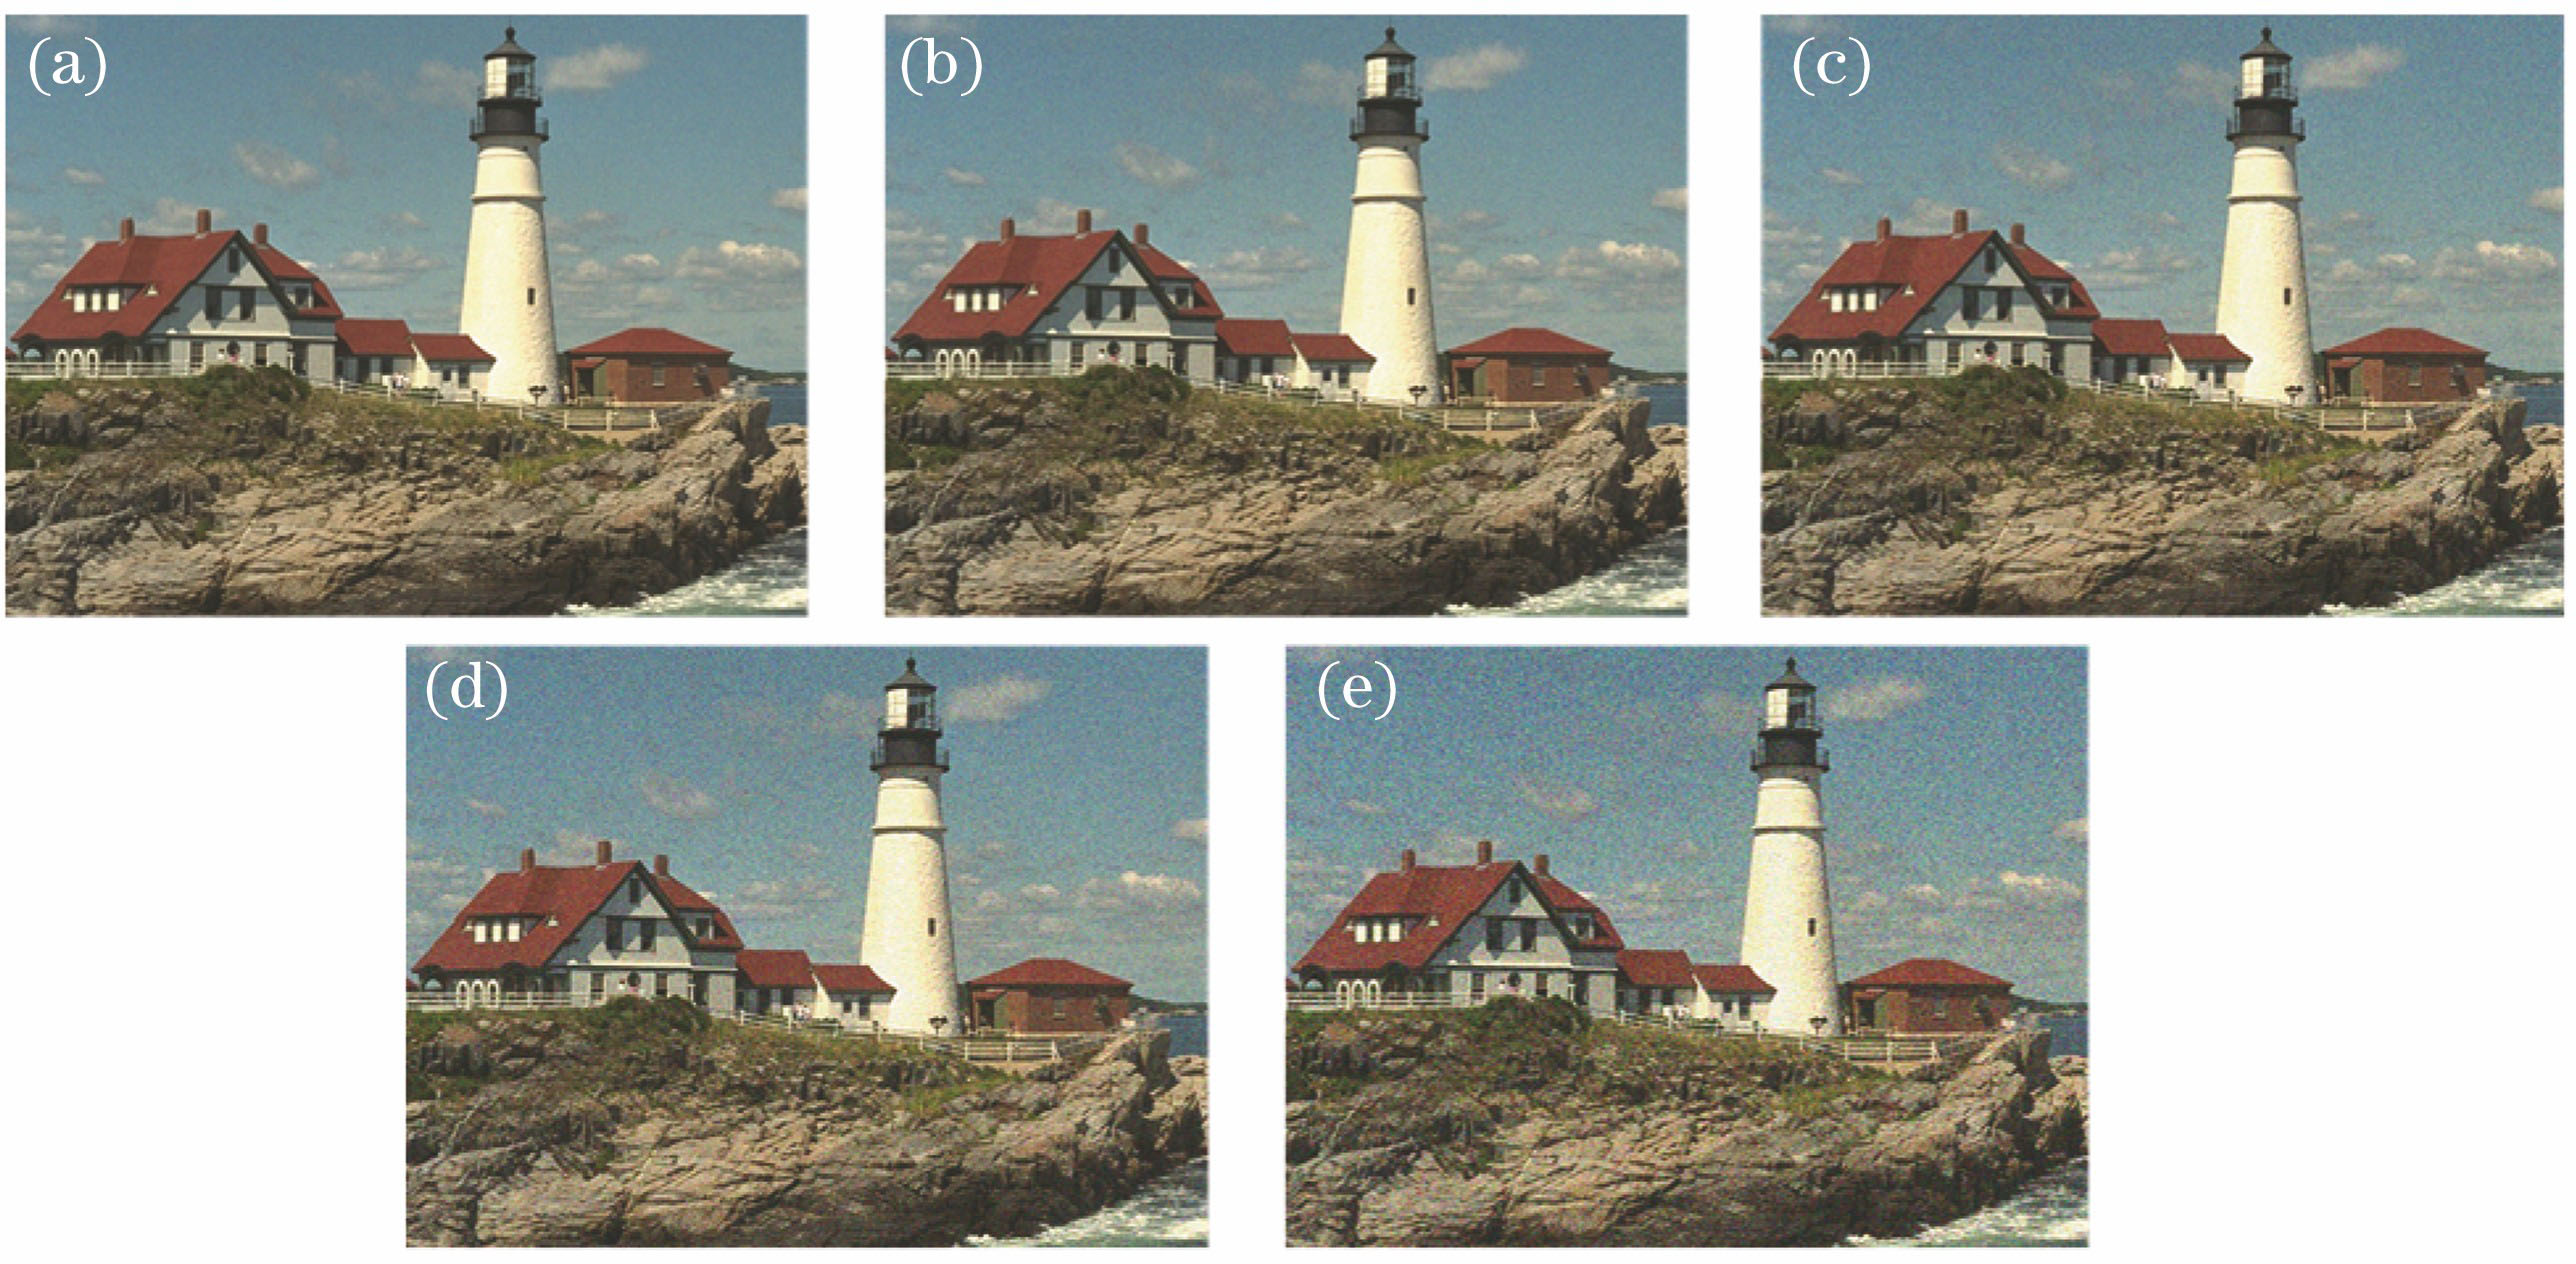 Five additive Gaussian noise images of different distortion levels. (a)-(e) Level 1-5